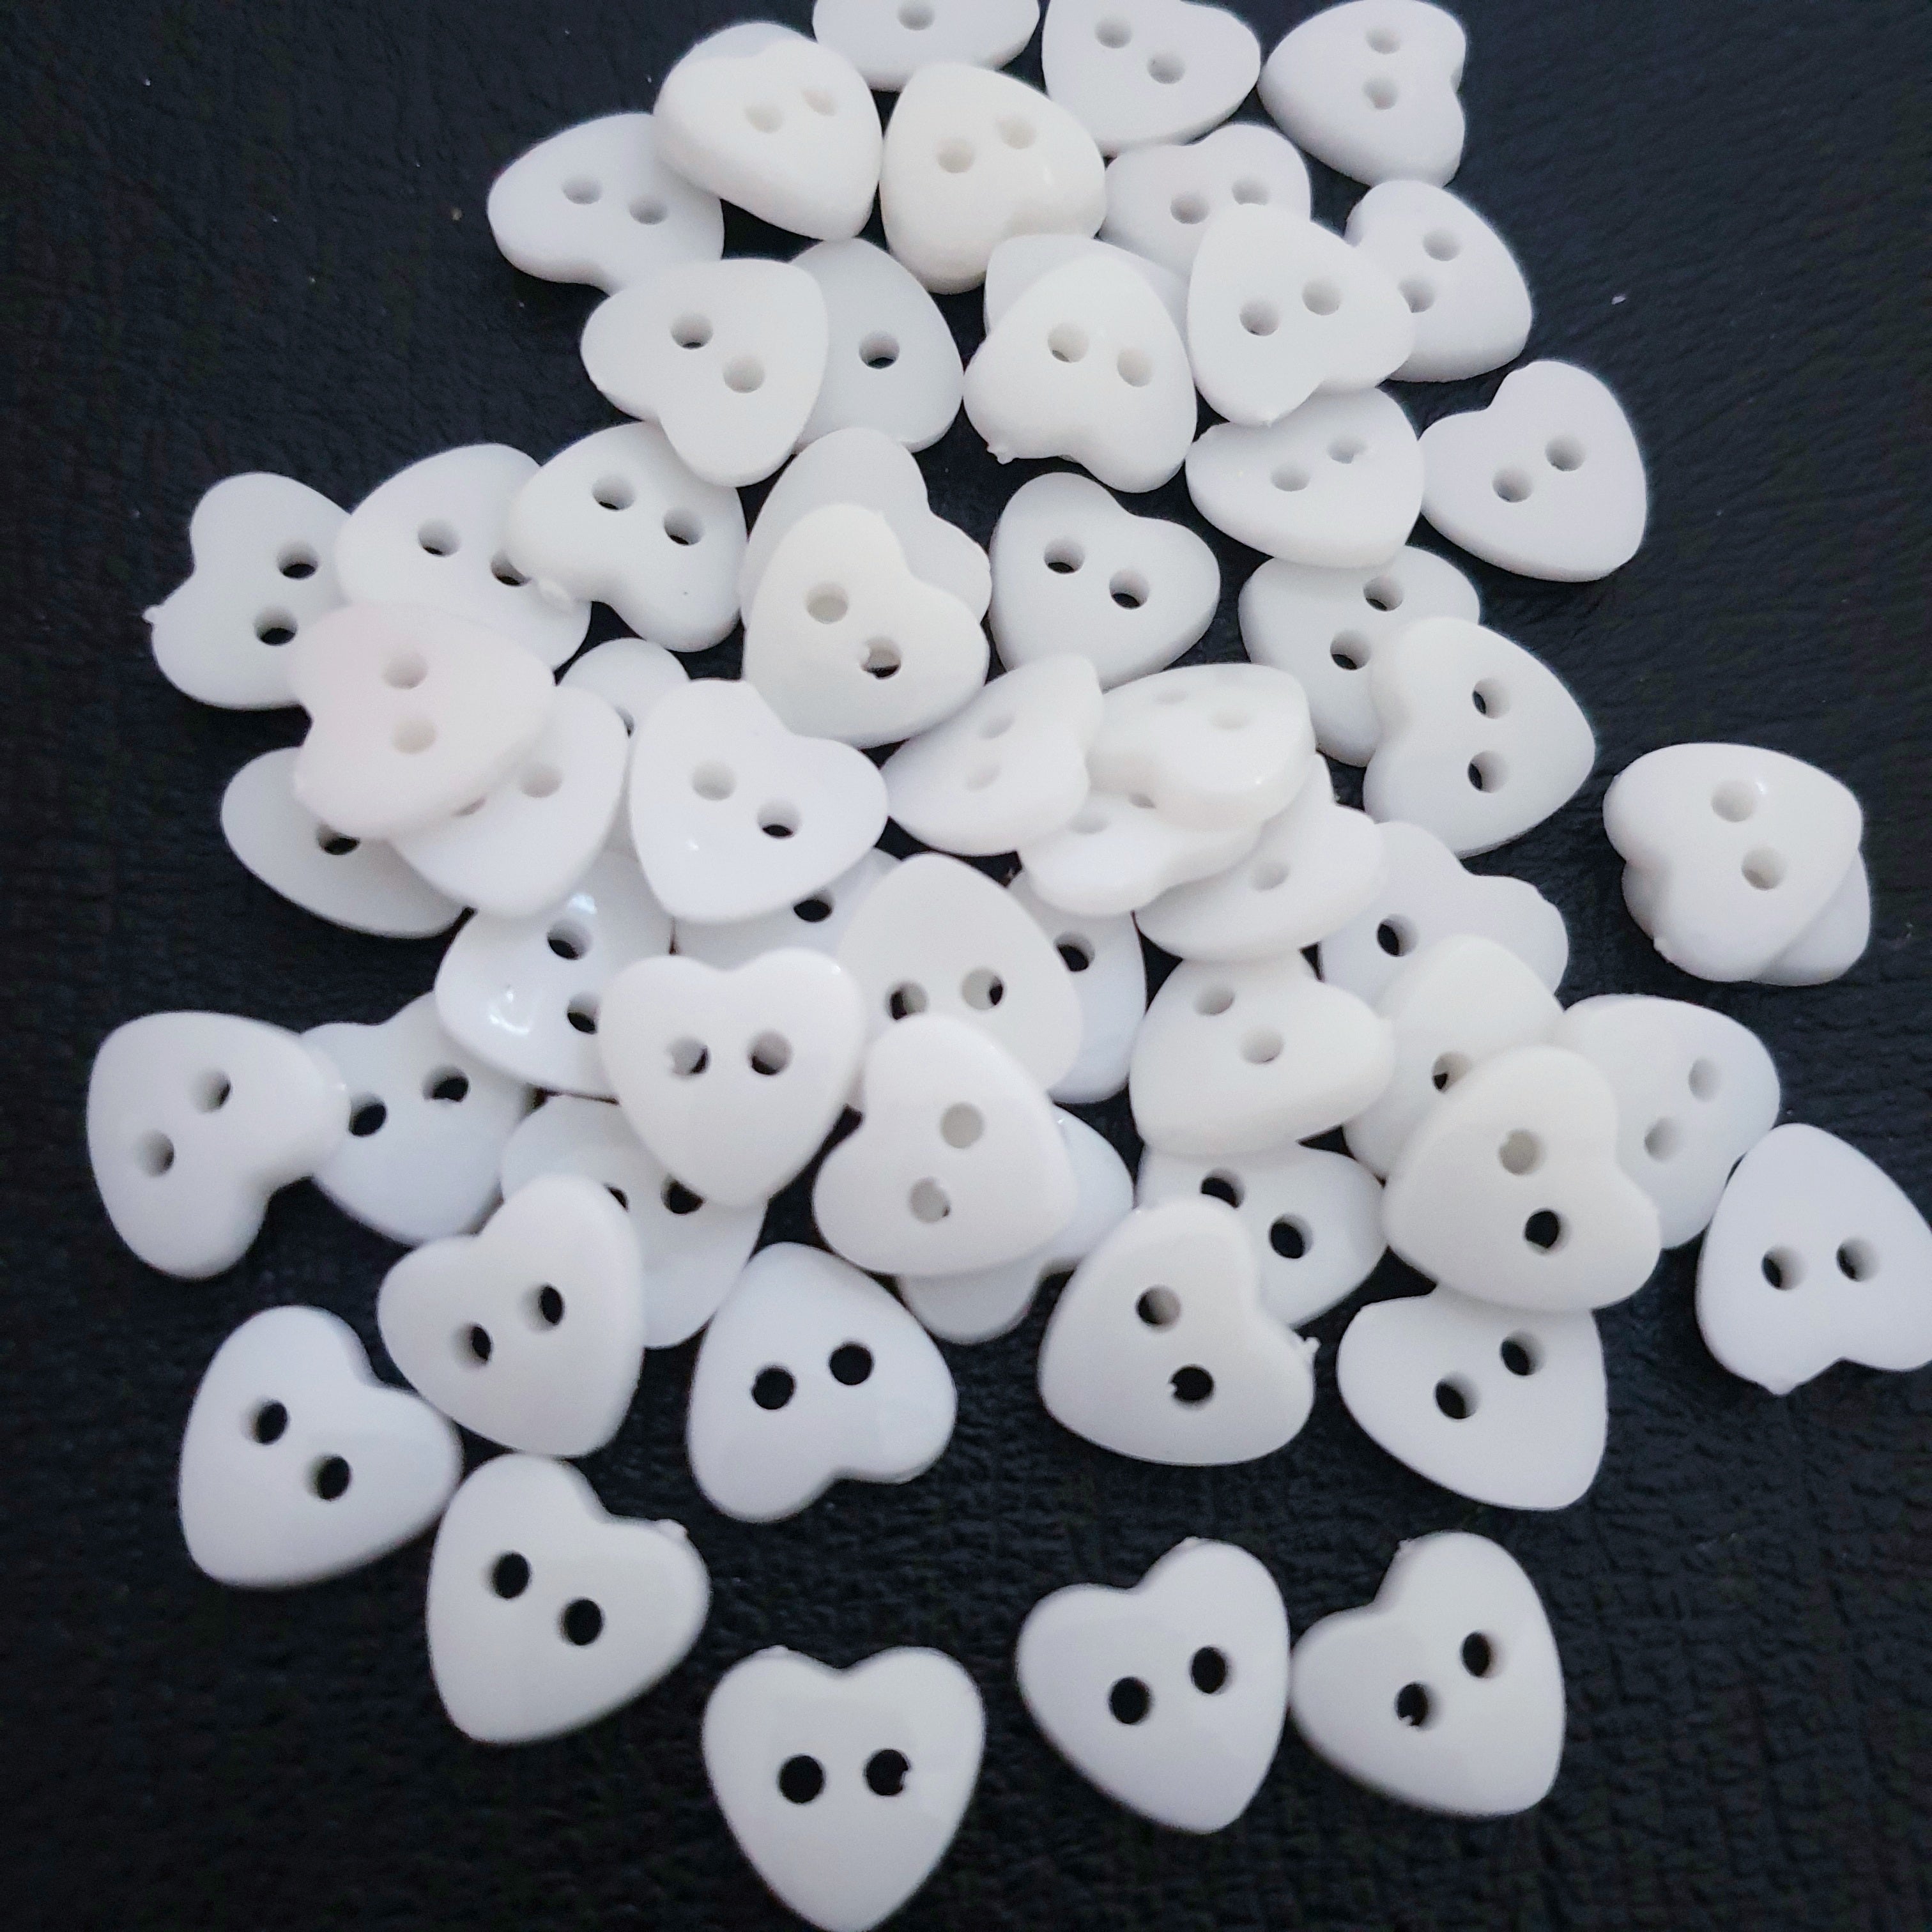 MajorCrafts 60pcs 13mm White Heart Shaped 2 Holes Resin Sewing Buttons